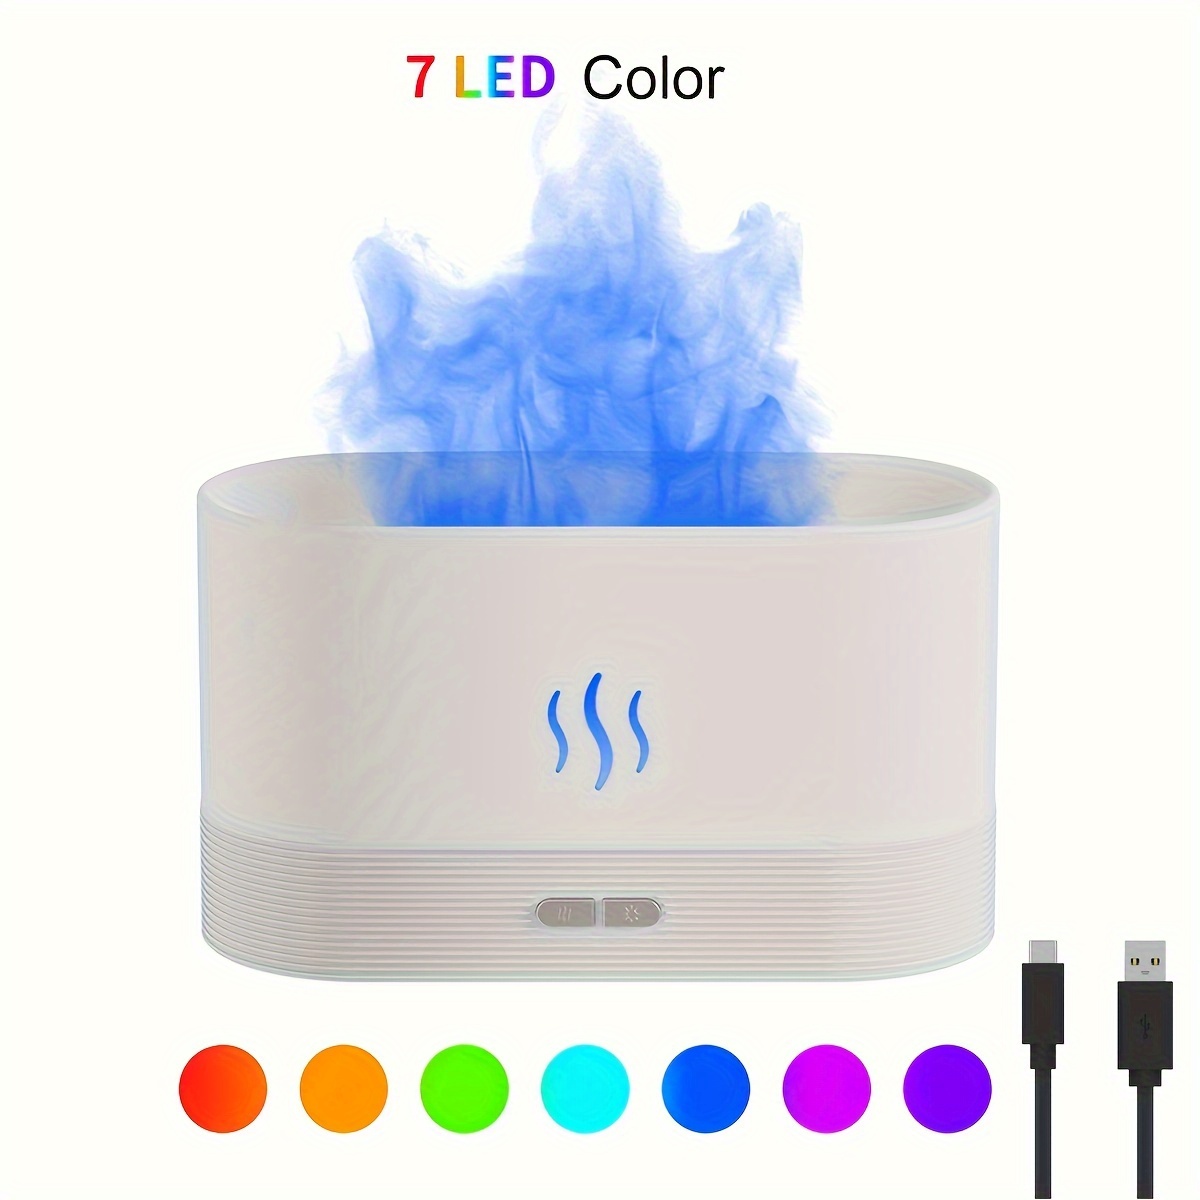 1pc Colorful LED Flame Aroma Diffuser Bedroom Table Atmosphere Decorative  Lamp Creative Humidifier Light For Living Room Office USB5V Power Supply